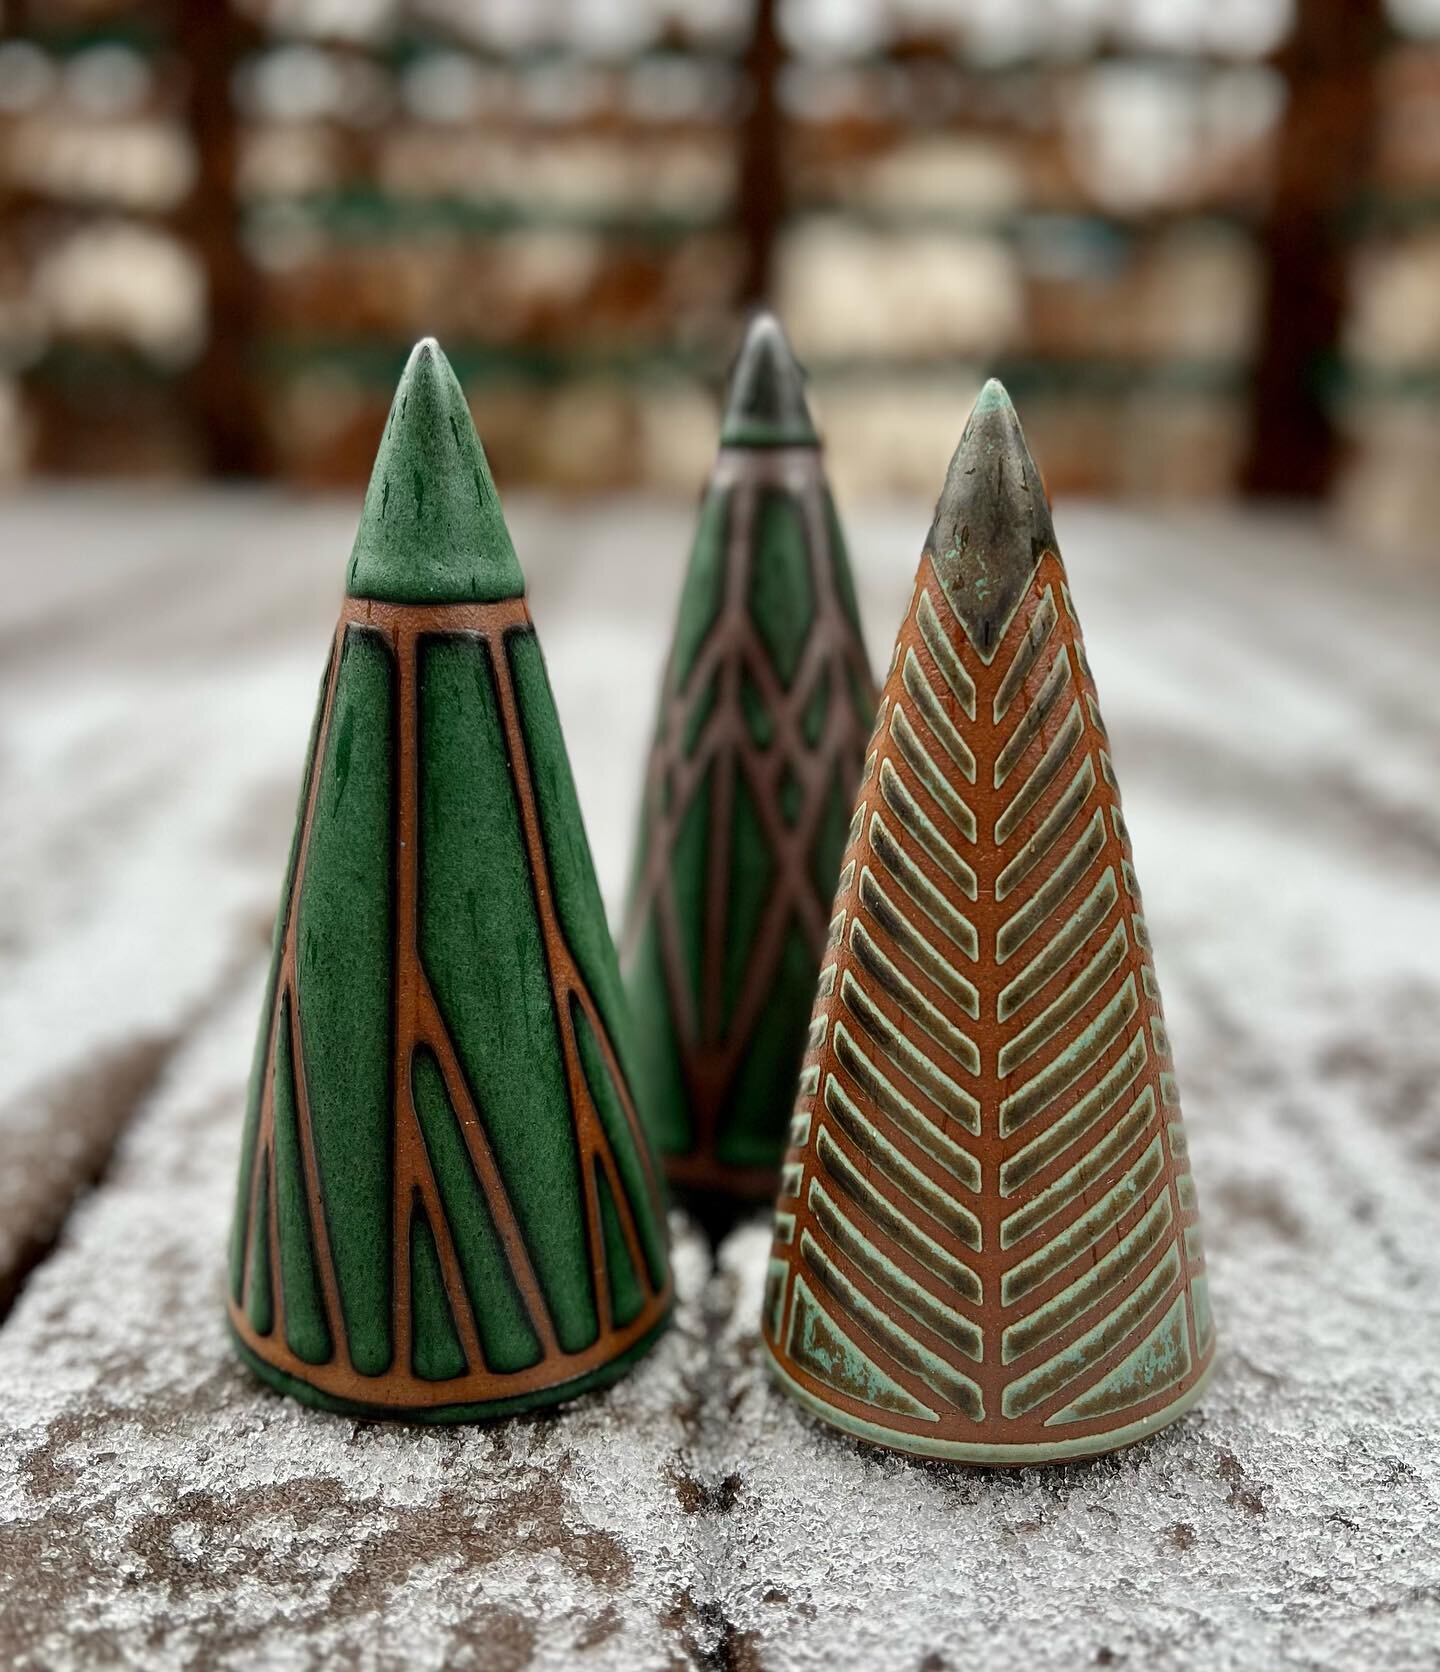 A fellow potter requested one of my taped Christmas trees in a matte green, so I experimented with a few glazes. (Some glazes run too much to be useful with crisp tape lines.) I&rsquo;m thrilled with how all three of these turned out!
🎄
#ChicagoPott